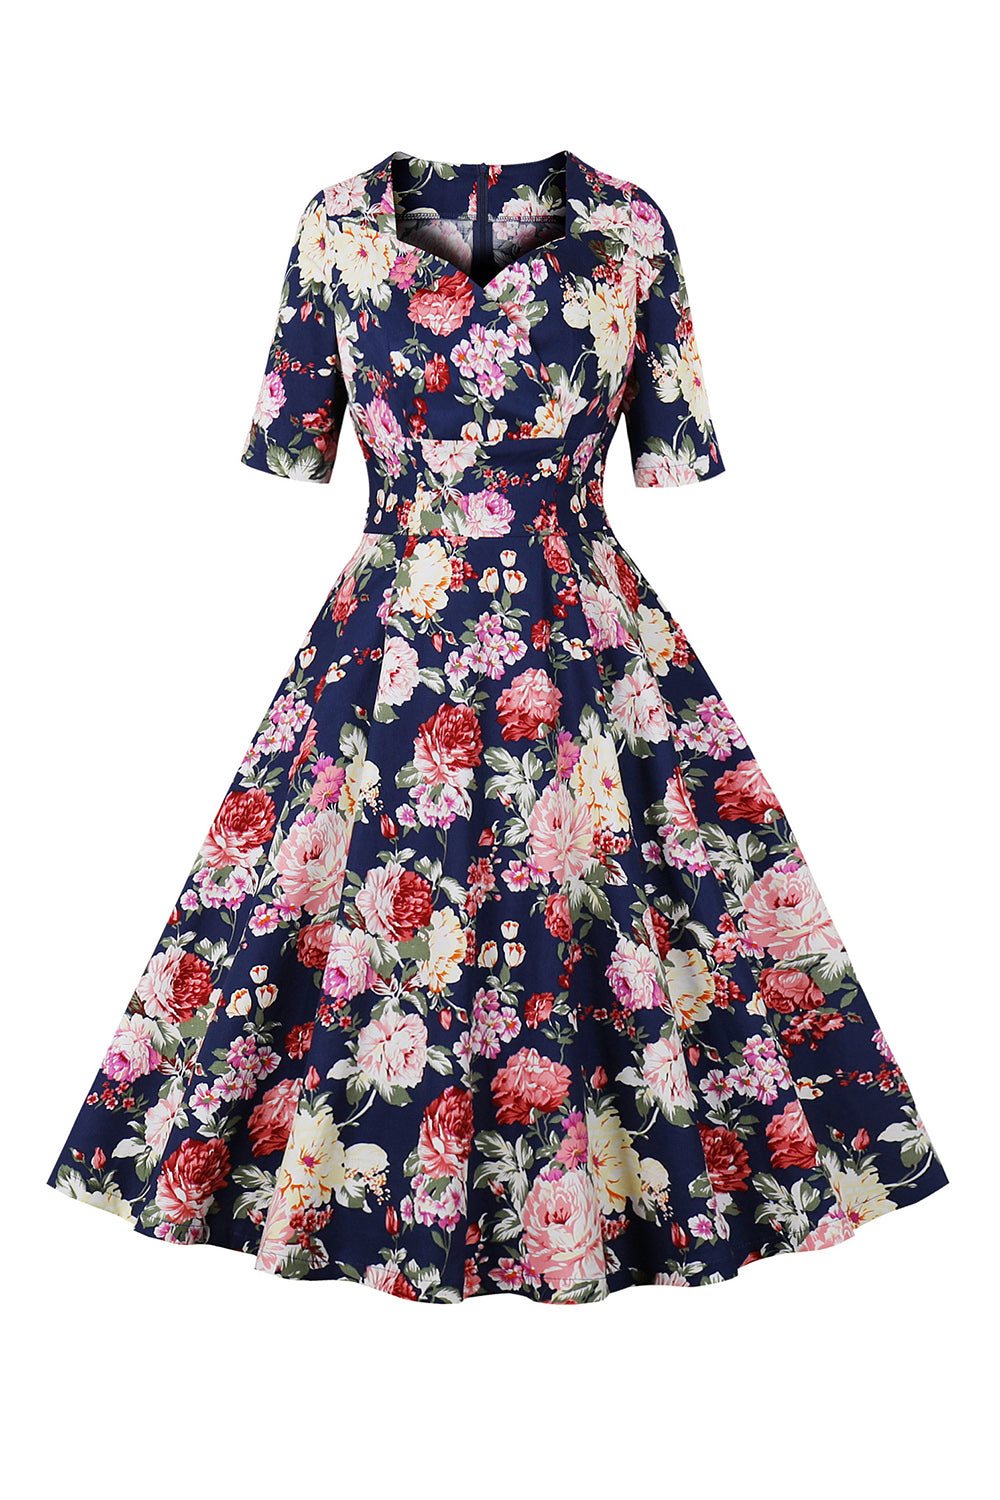 Navy Floral Printed Swing 1950s Dress with Short Sleeves